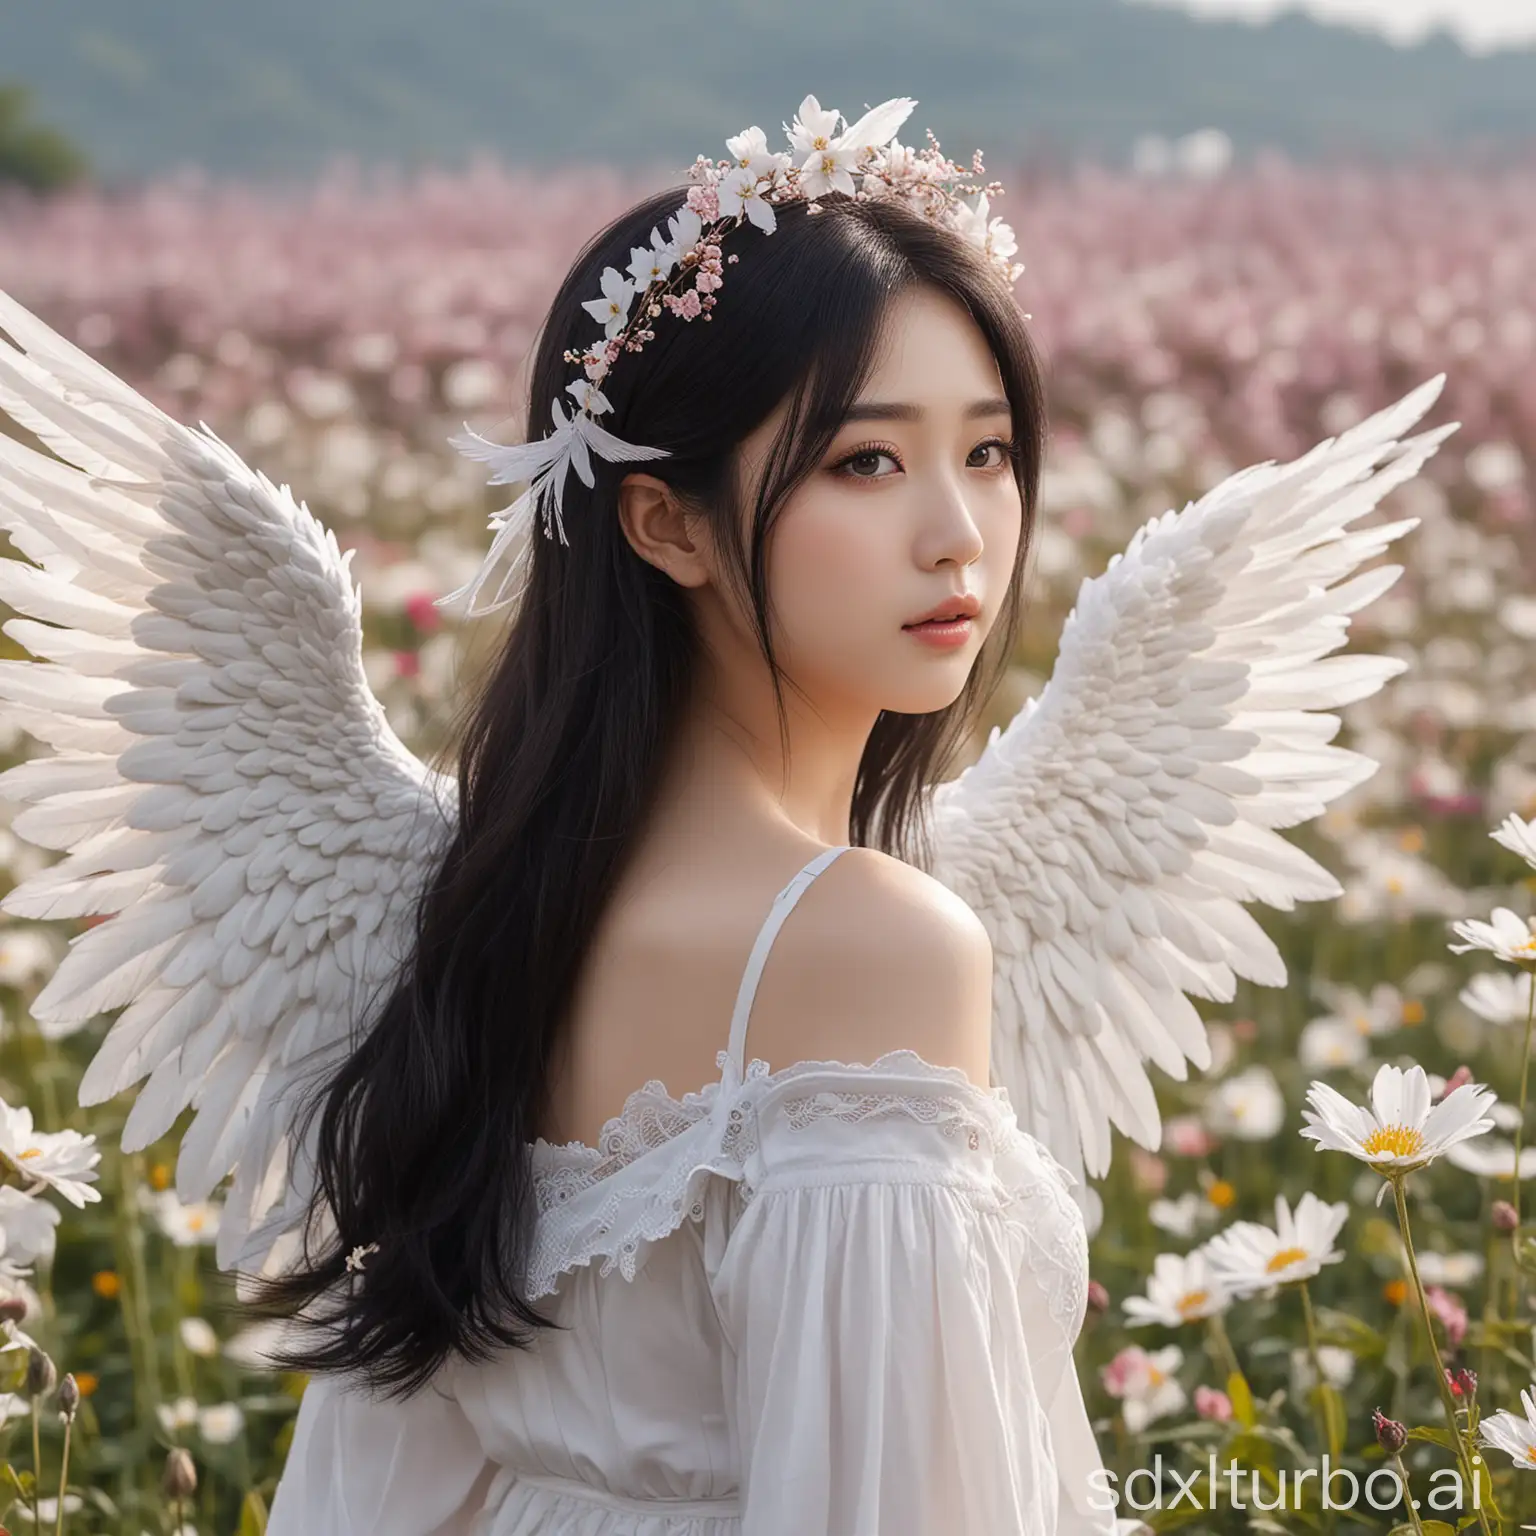 Images of beautiful angel, high quality, 4k, very beautiful face, Japanese, Korean-style face, white skin, black hair, long hair, angel wings, wings fluttering, background is a flower field